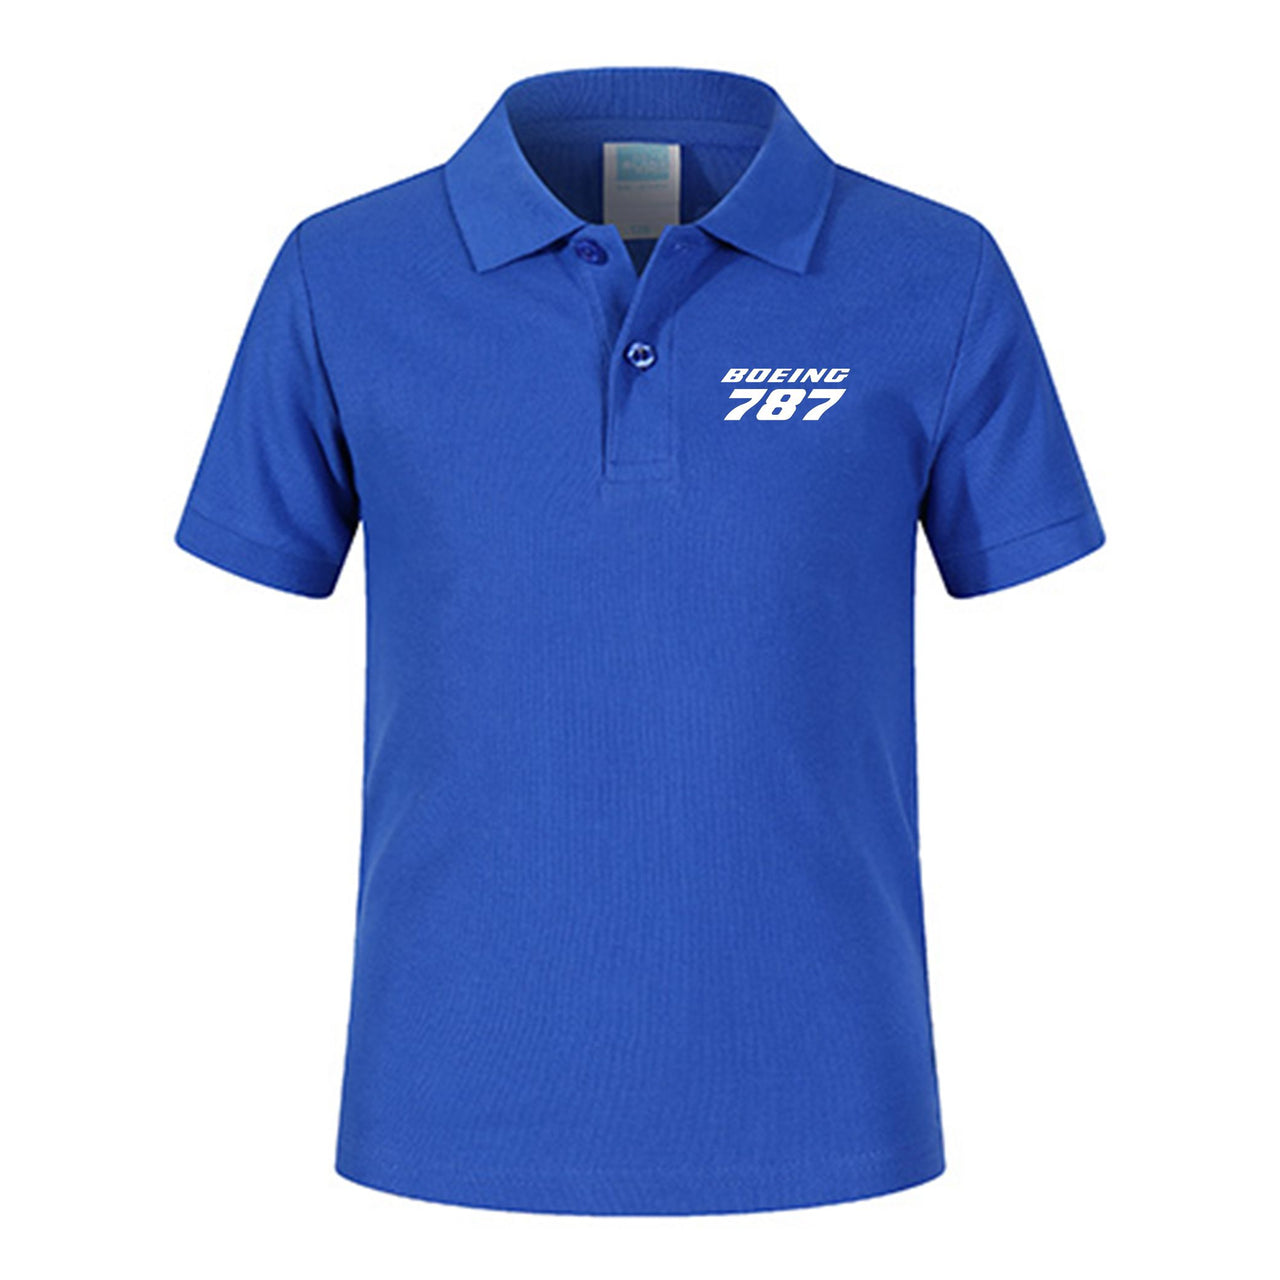 Boeing 787 & Text Designed Children Polo T-Shirts